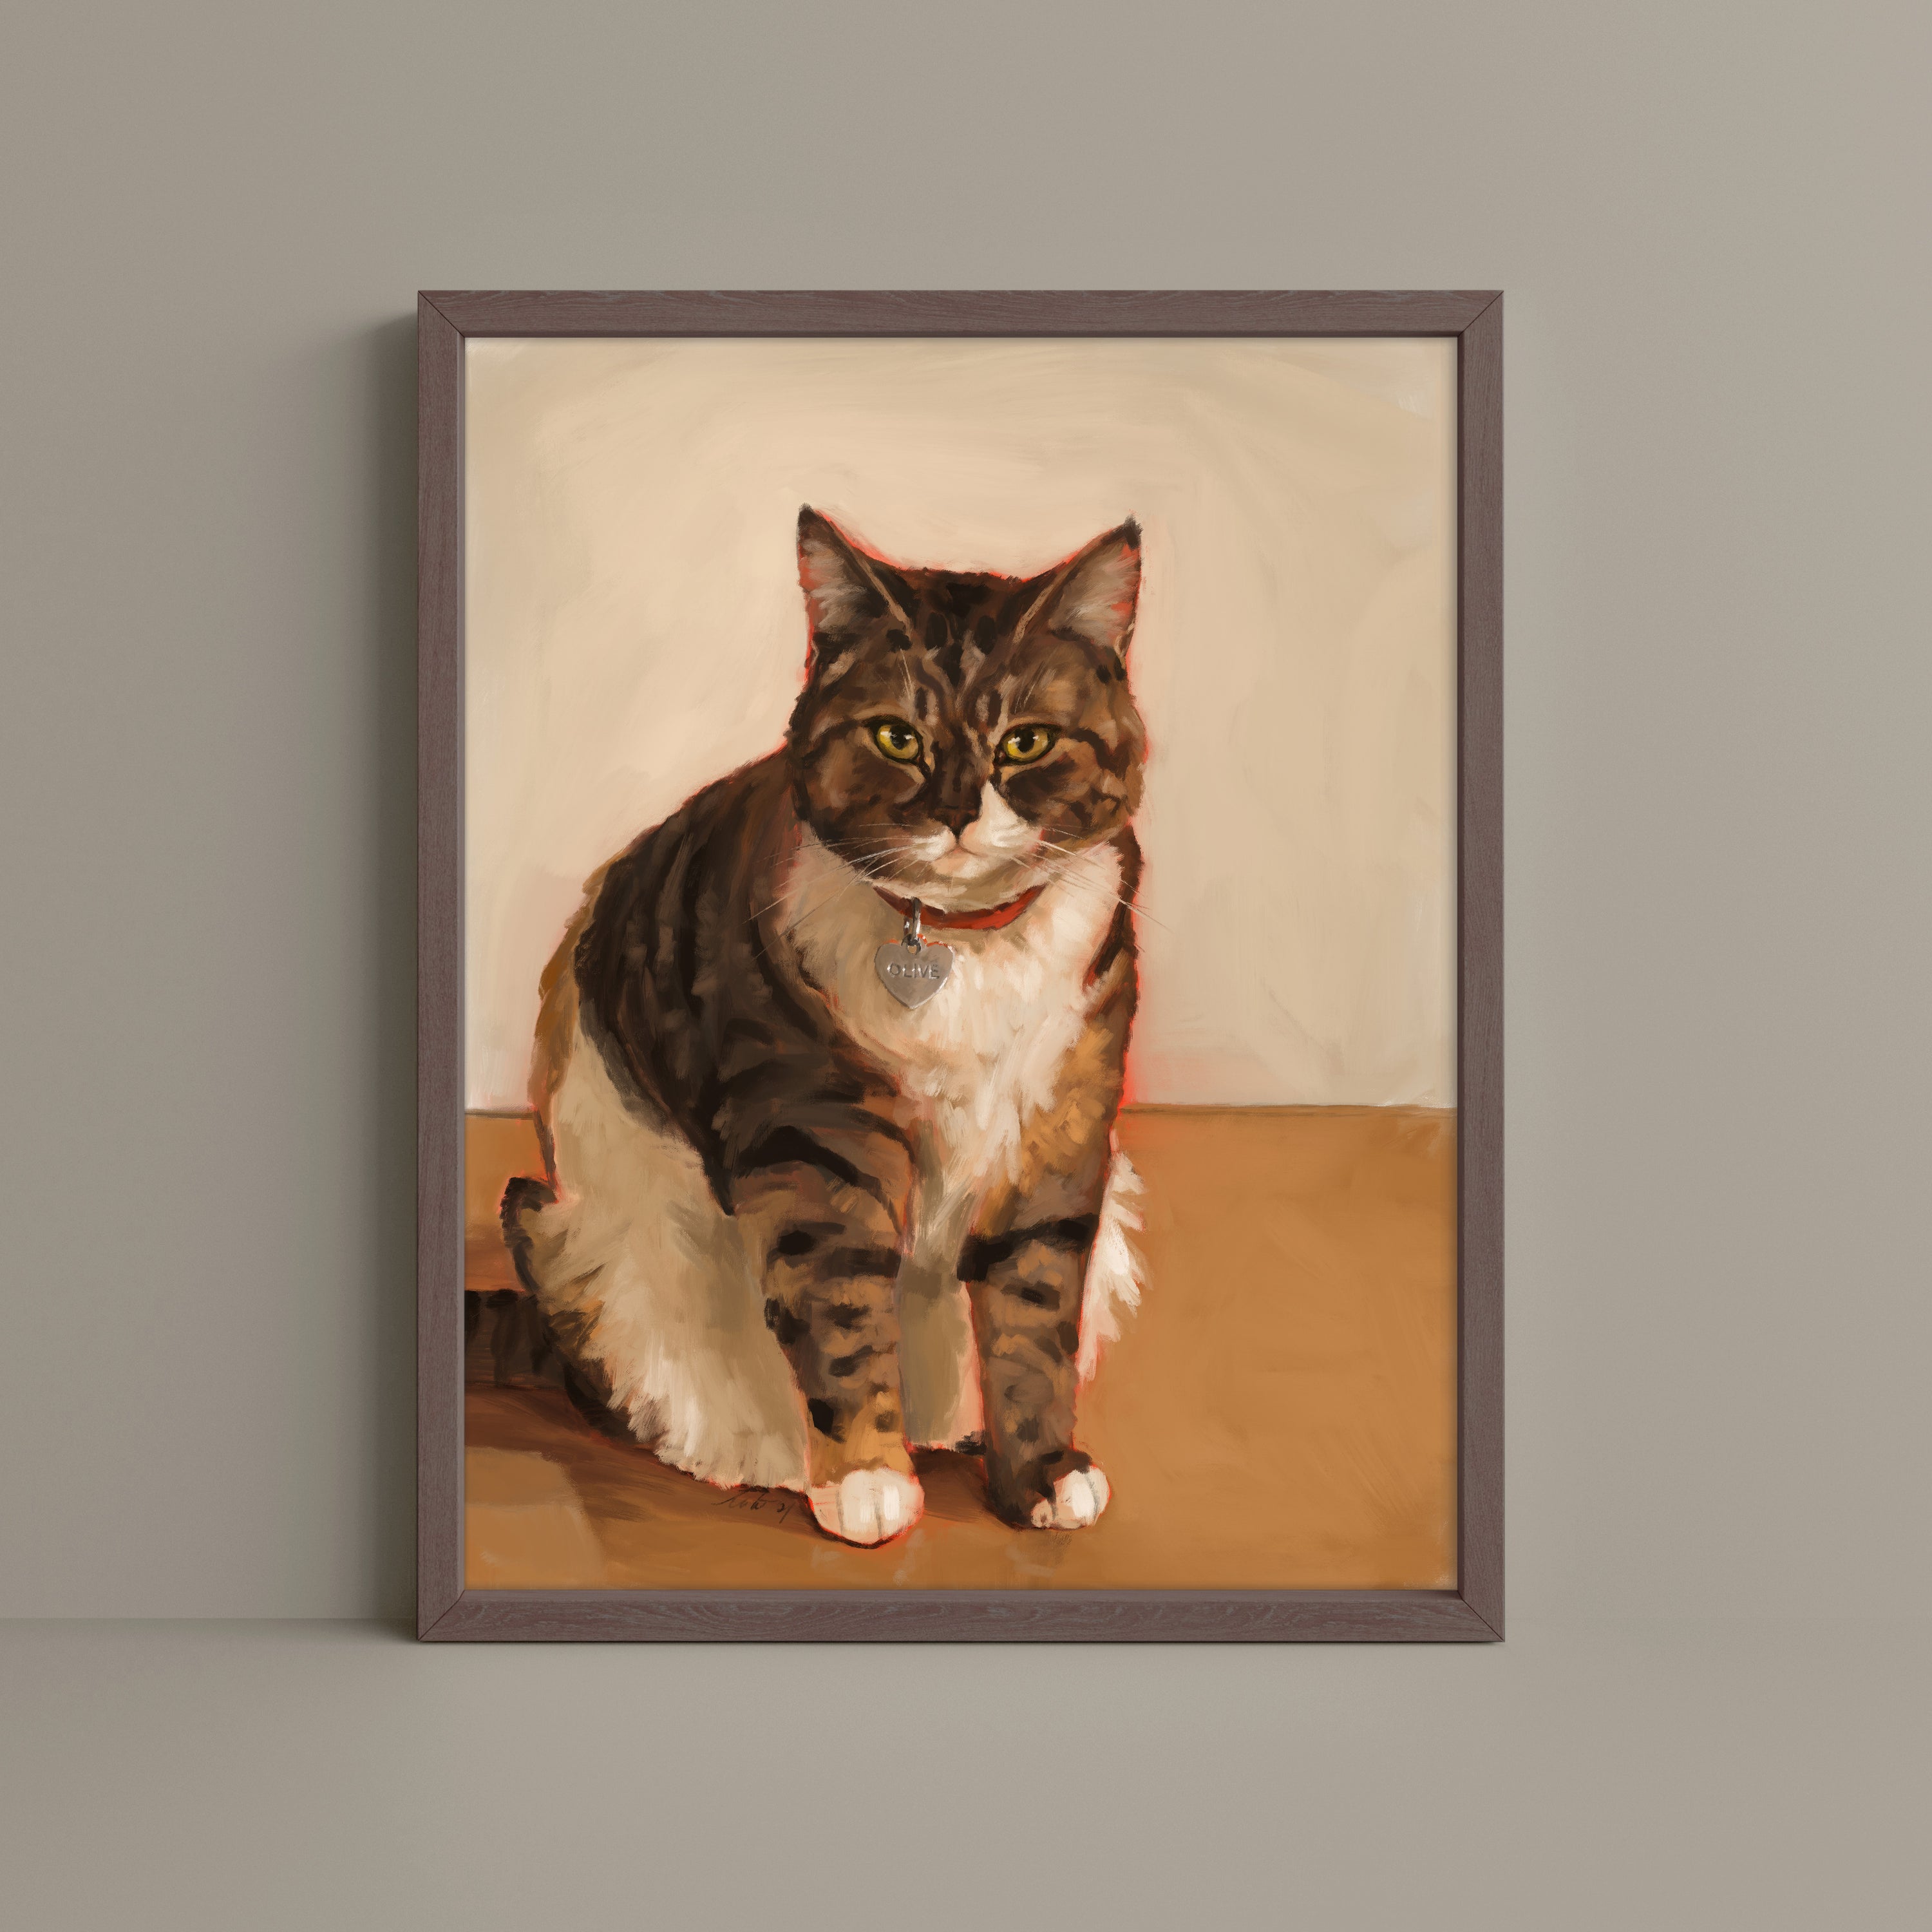 "Olive" by Catherine Hébert - Brown and White Tabby Cat Art Print